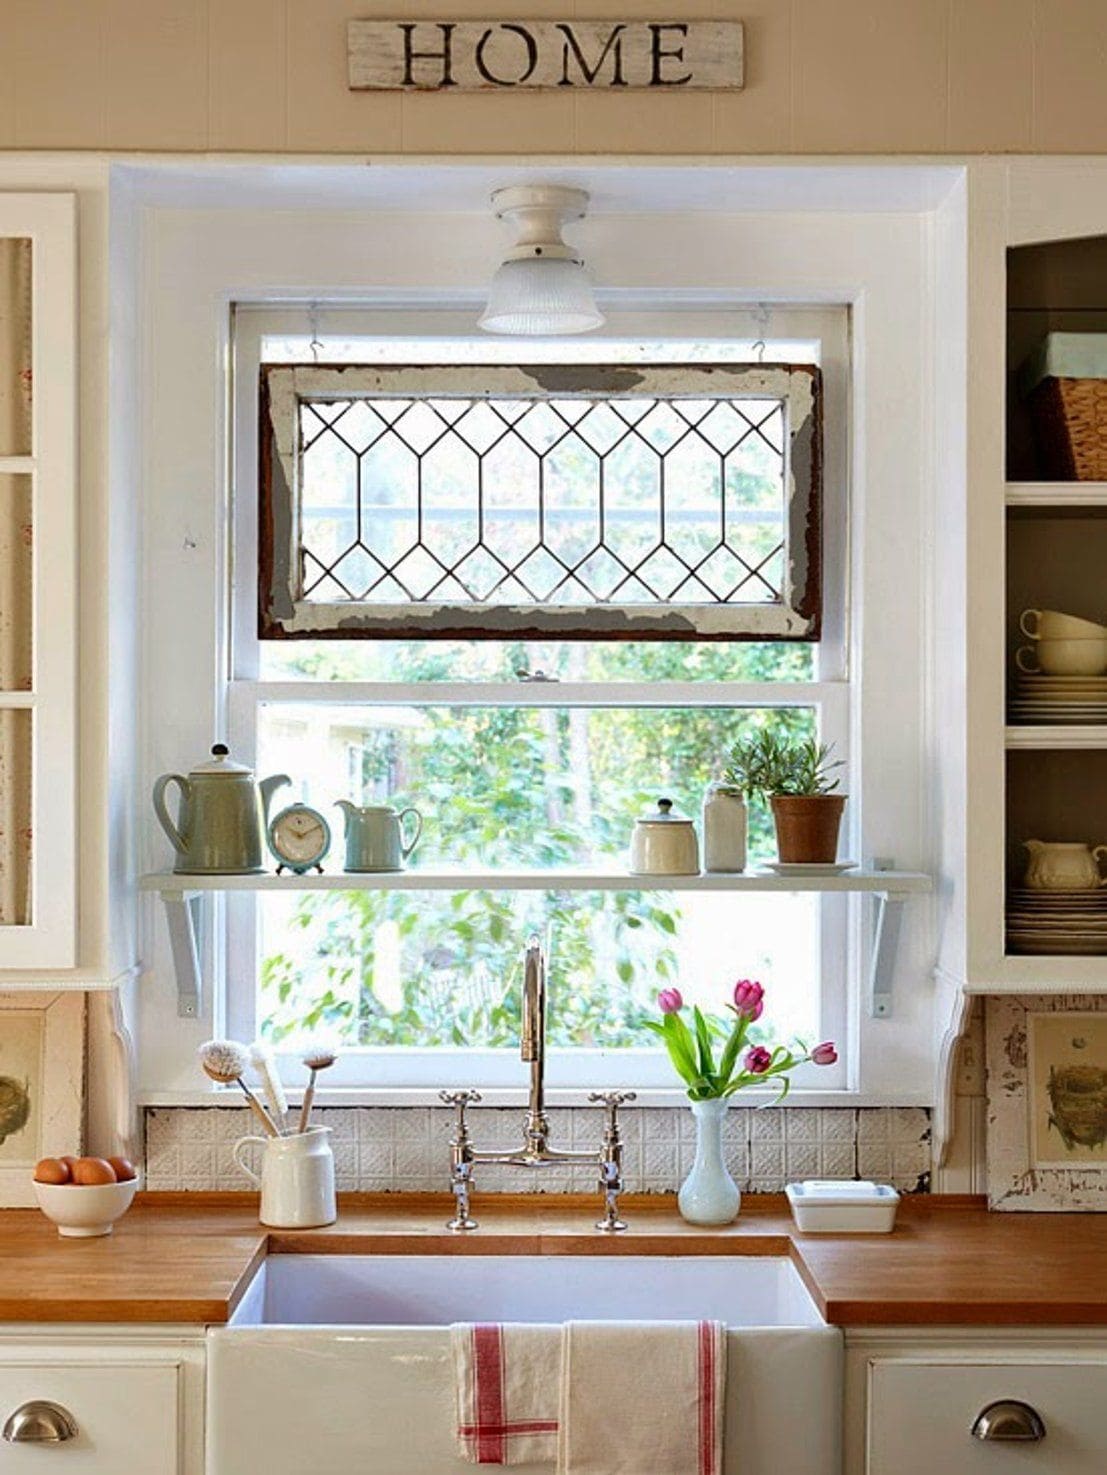 25 creative kitchen window decorating ideas you'll fall for - 75